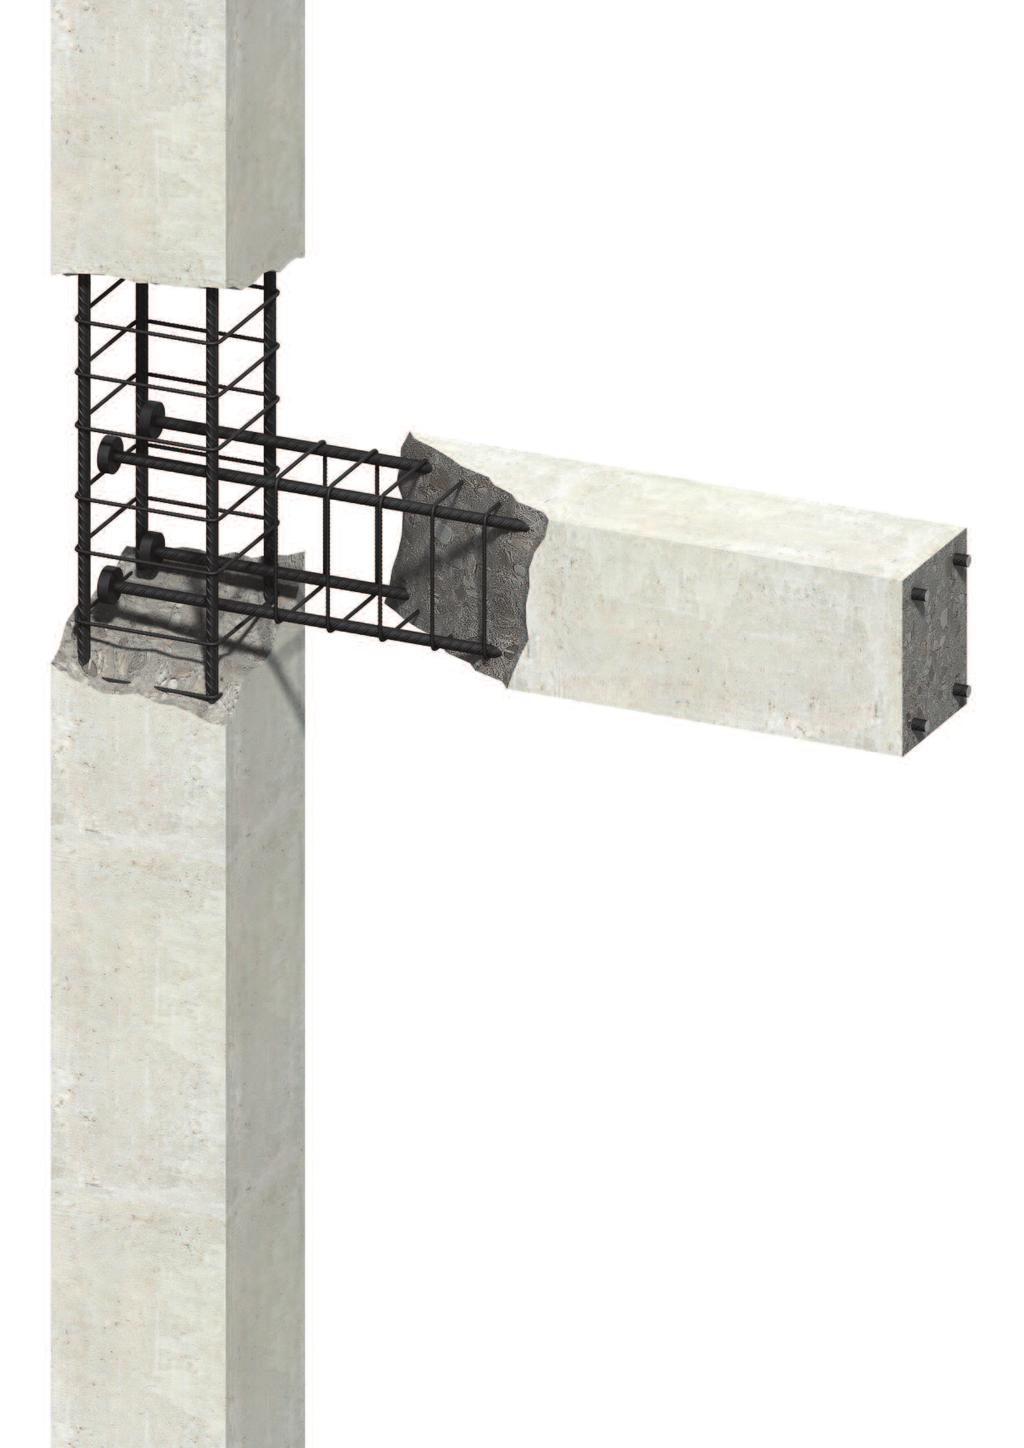 Ancon Anchors Ancon Anchors create an anchorage in the concrete, replacing the need for cogged or hooked bar ends.